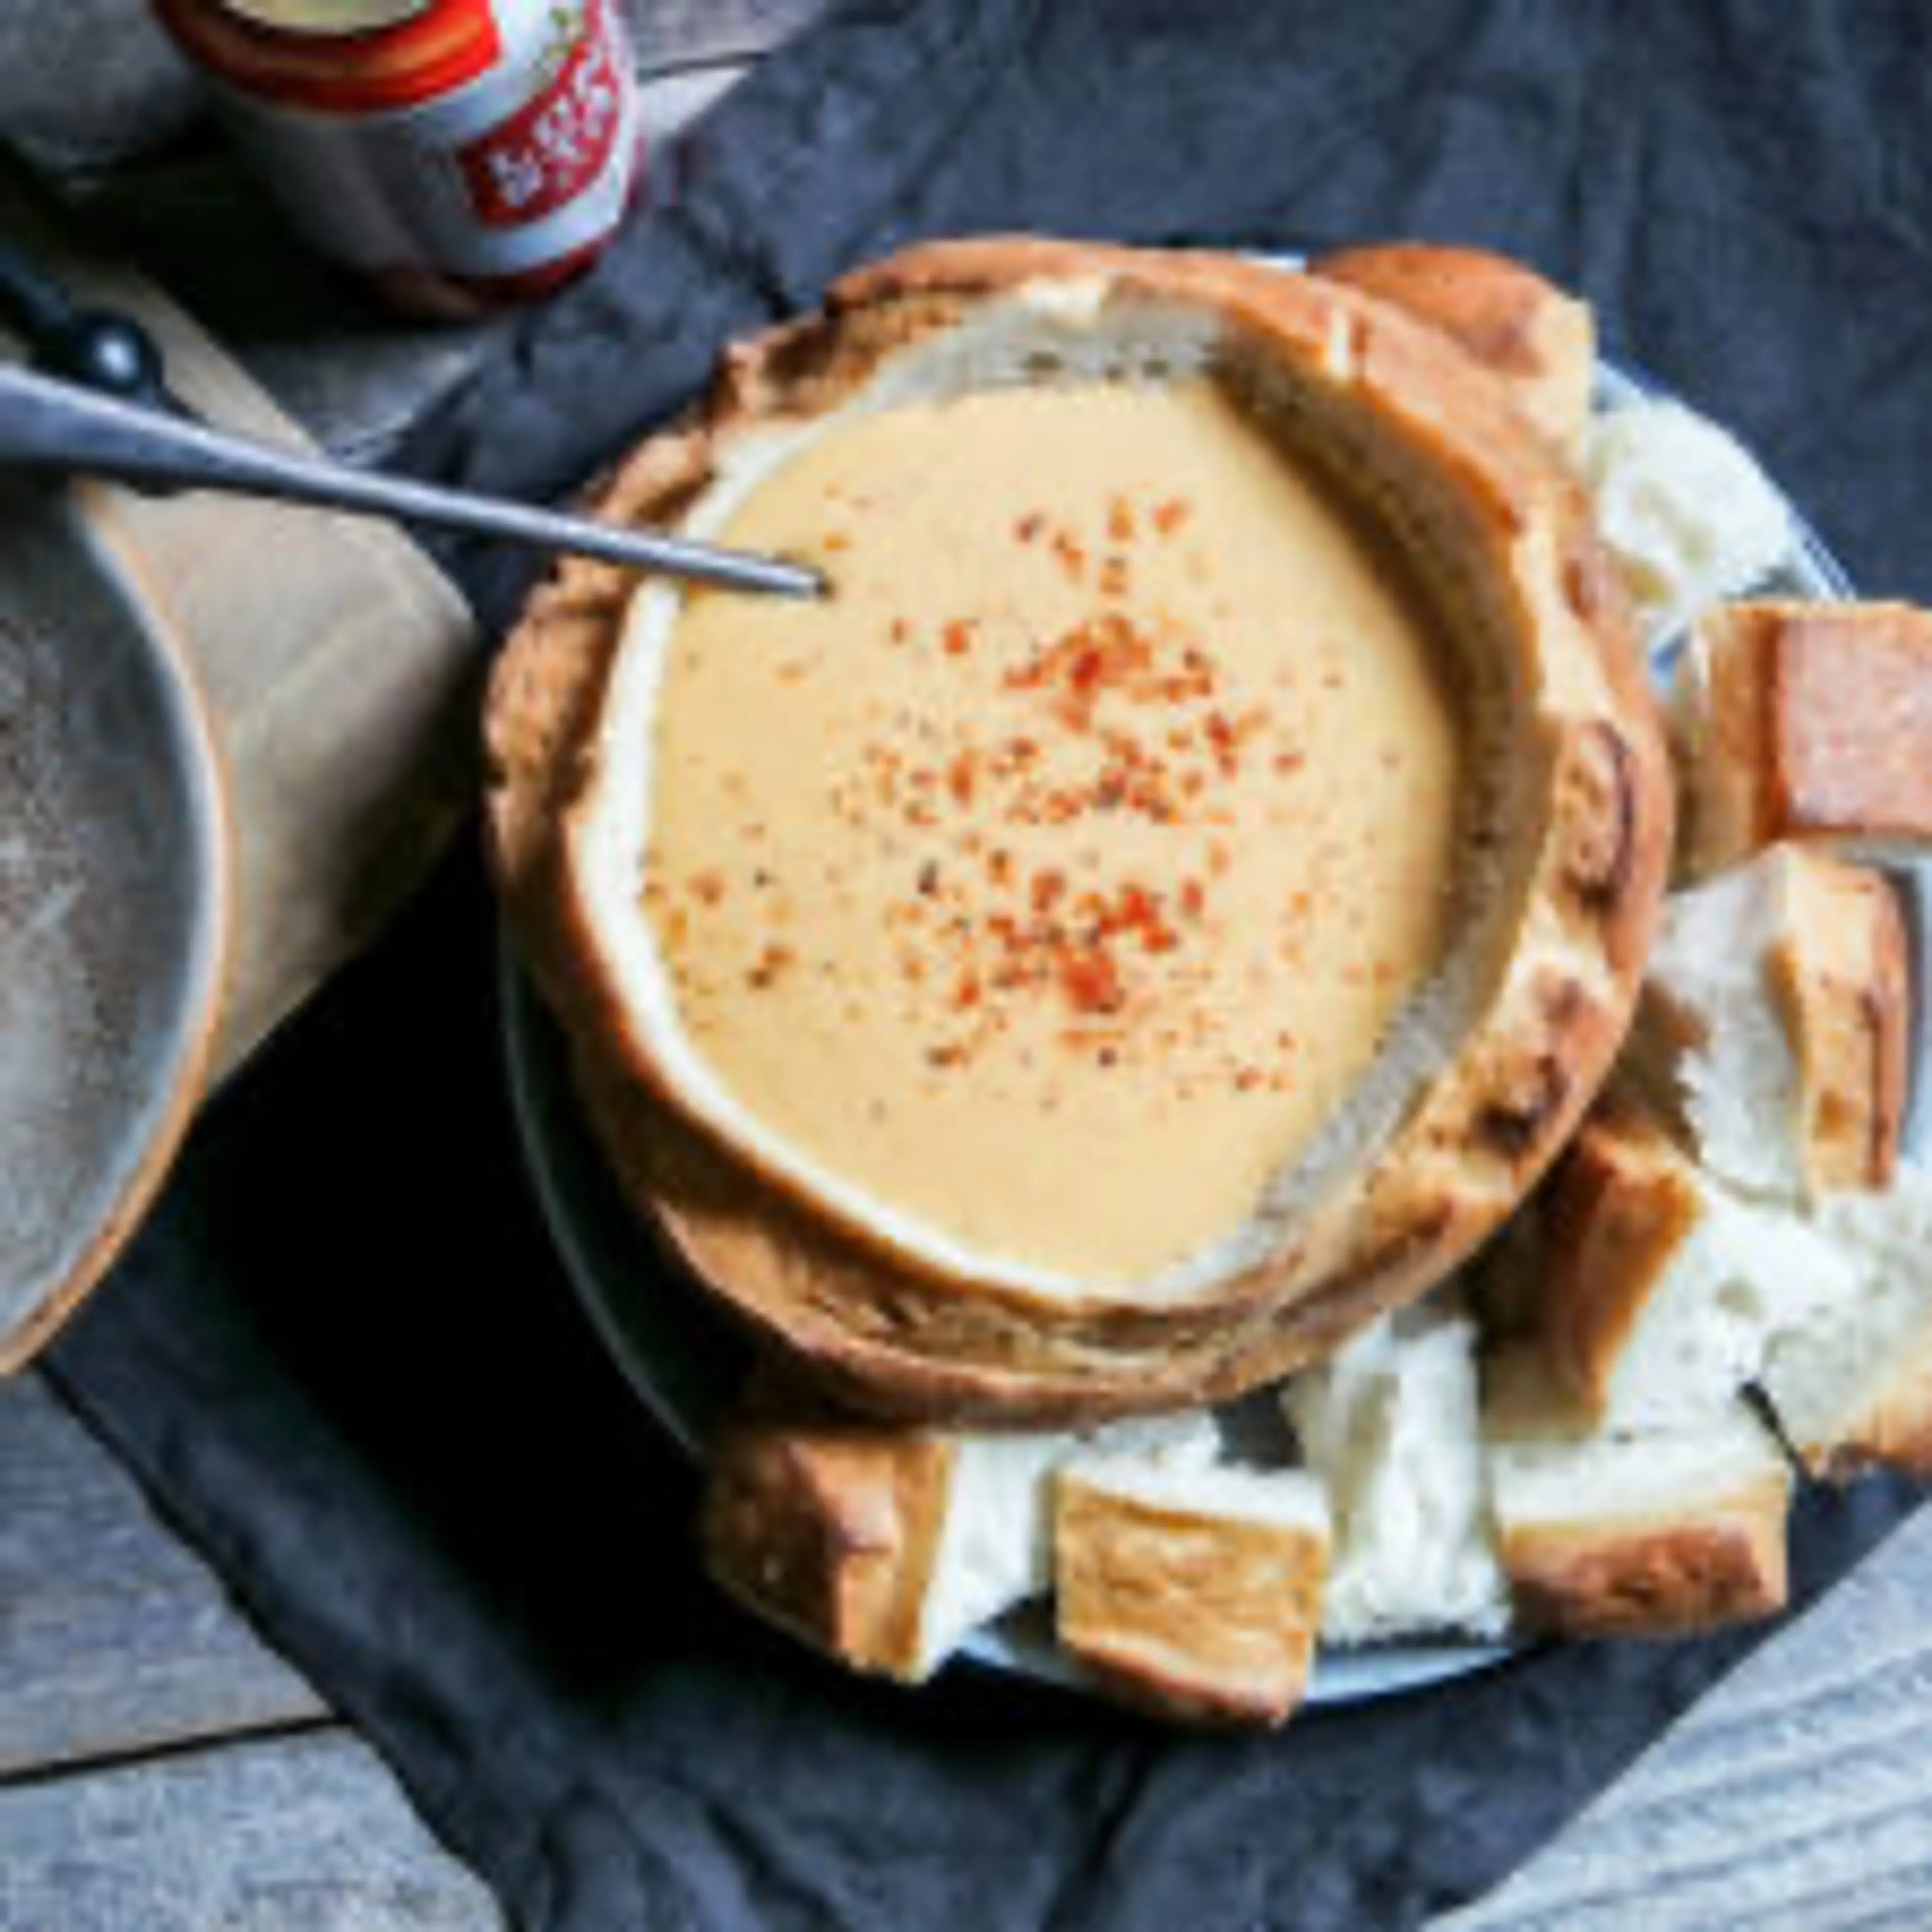 Lone Star Beer Cheese Dip - in a bread bowl!